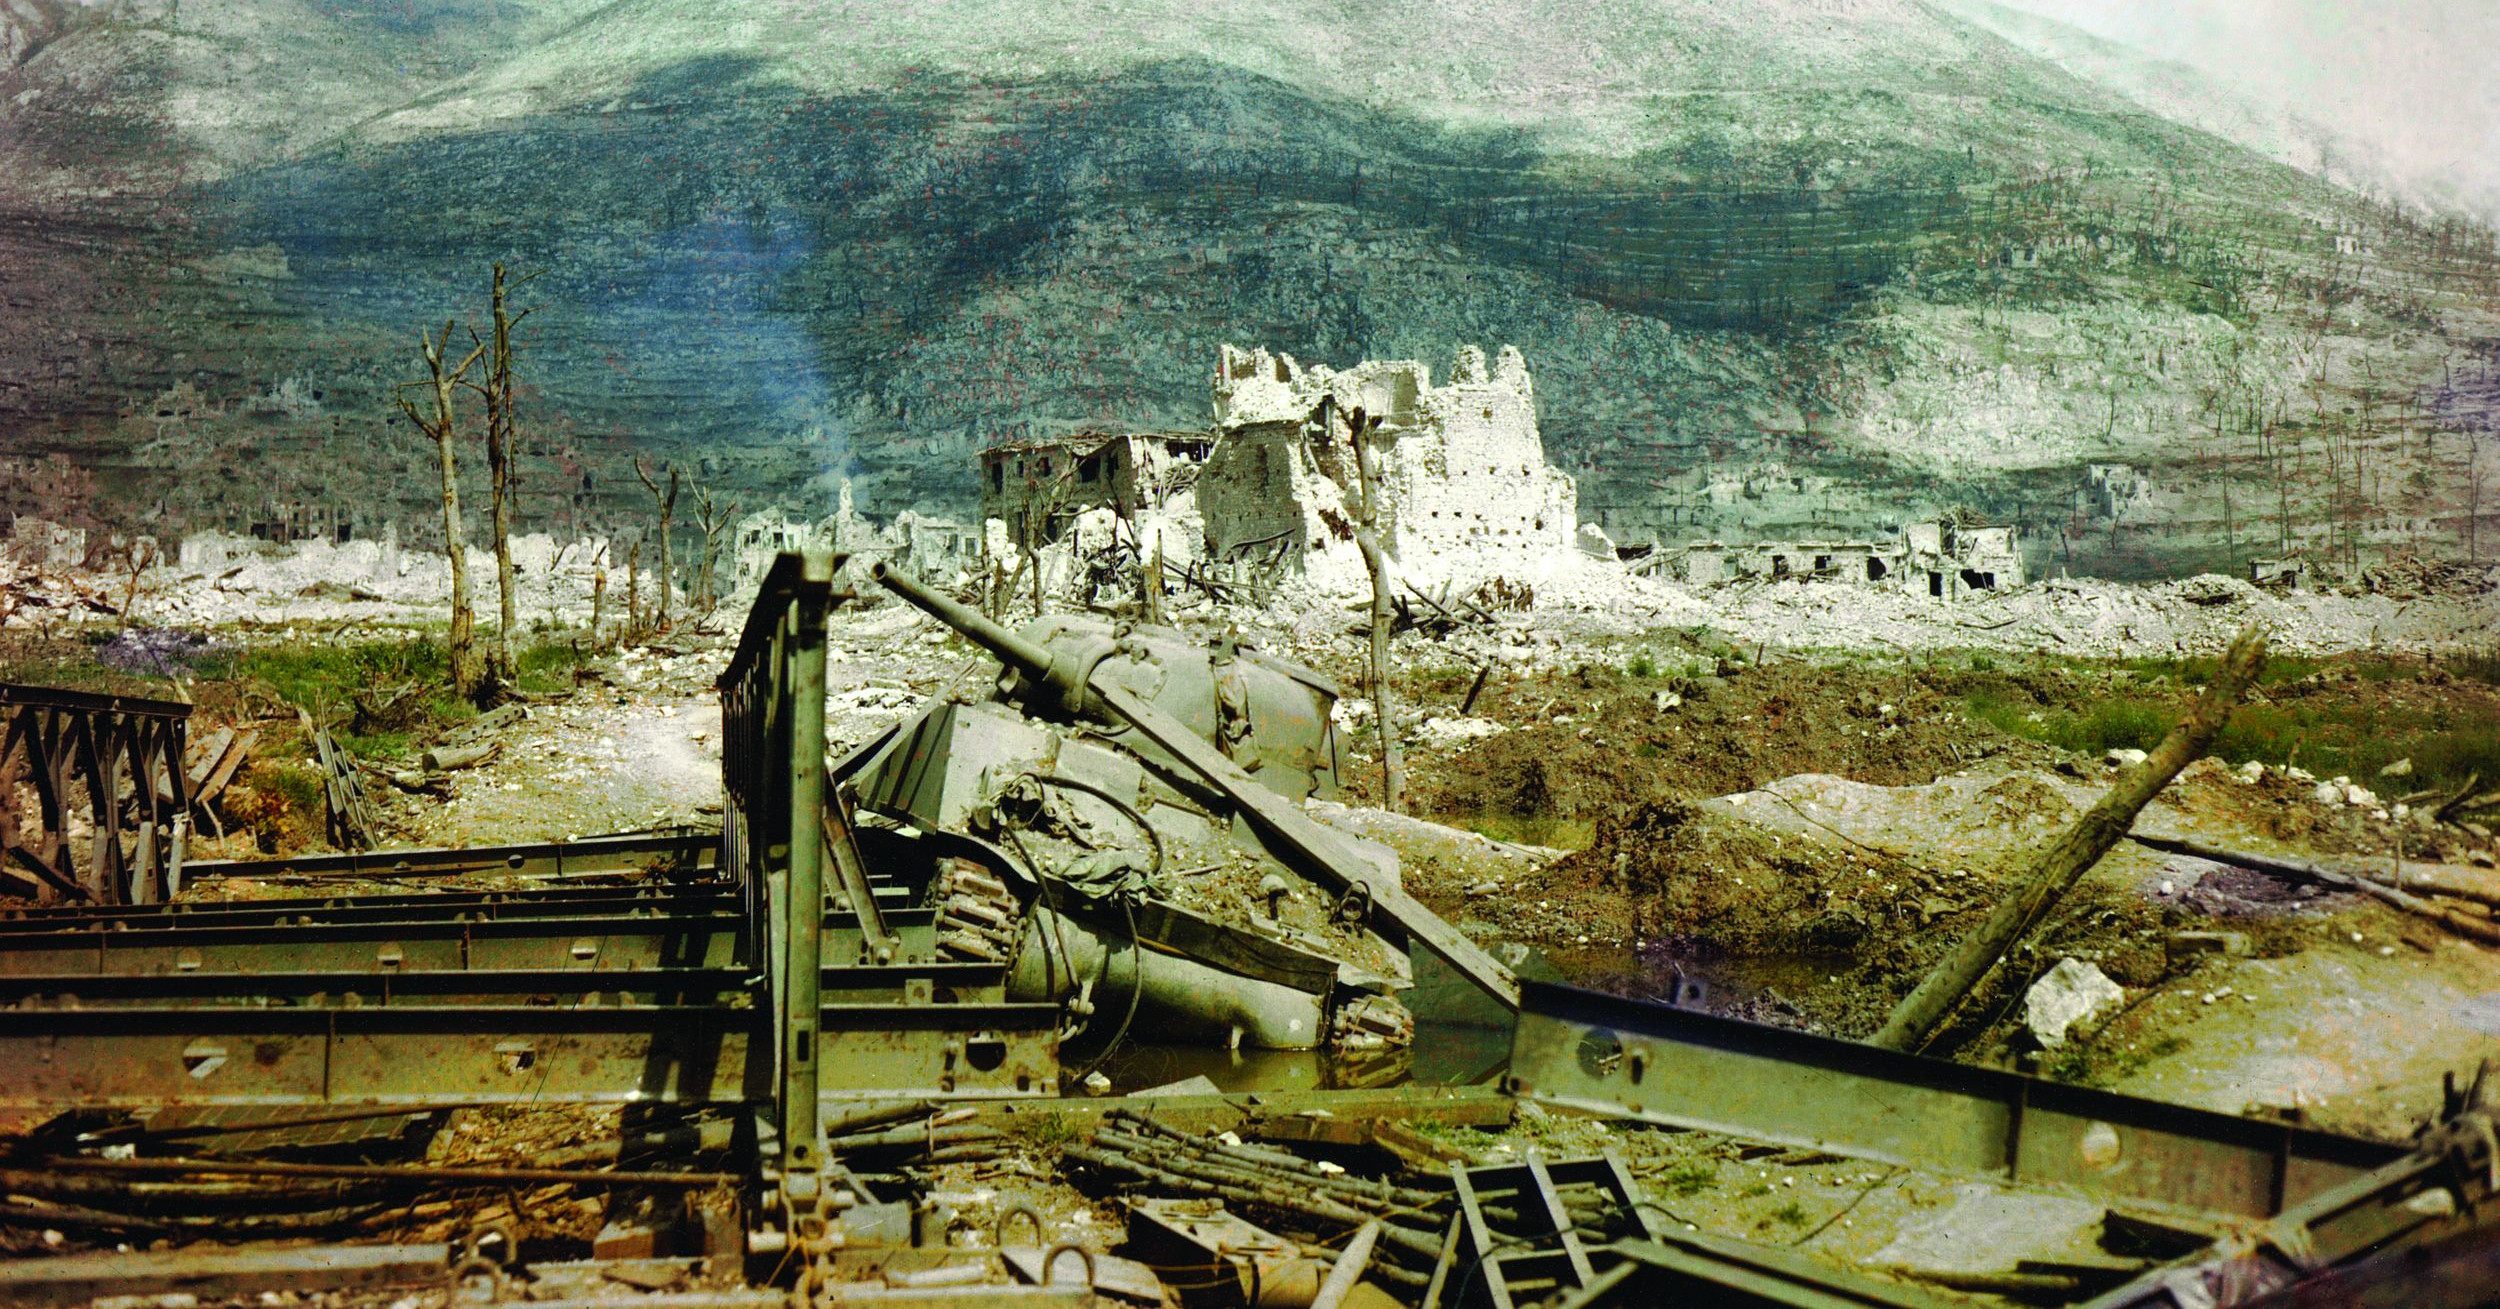 The town of cassino is left a shambles in the aftermath of heavy allied bombardment. anchoring the western end of the formidable gustav line, cassino and the benedictine abbey that crowned the adjacent mountaintop proved costly for the allies to capture. the wreckage of a sherman tank and a prefabricated bailey bridge lie in the foreground.